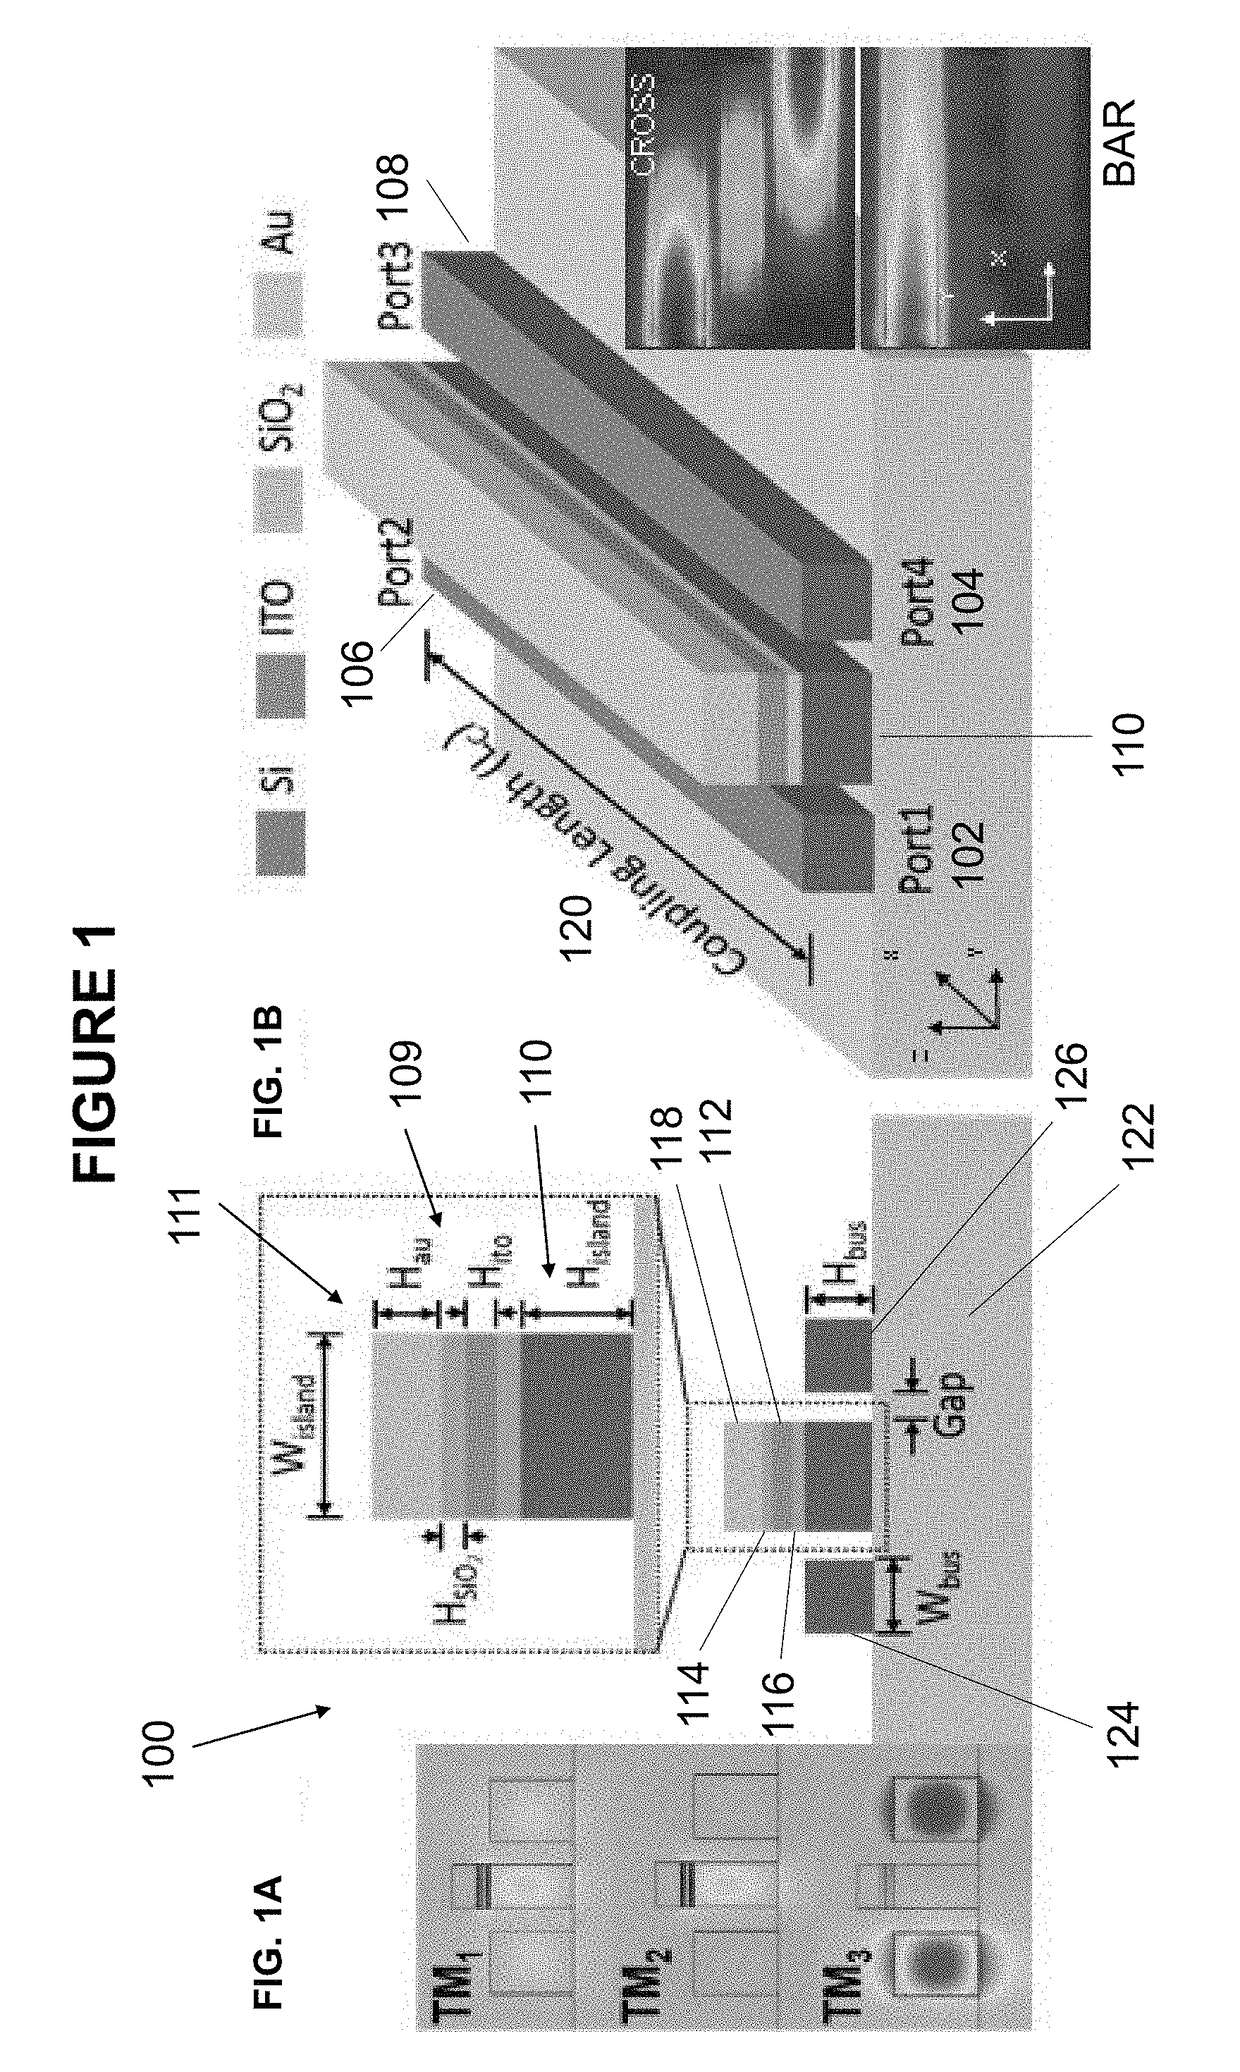 Hybrid photonic non-blocking wide spectrum WDM on-chip router